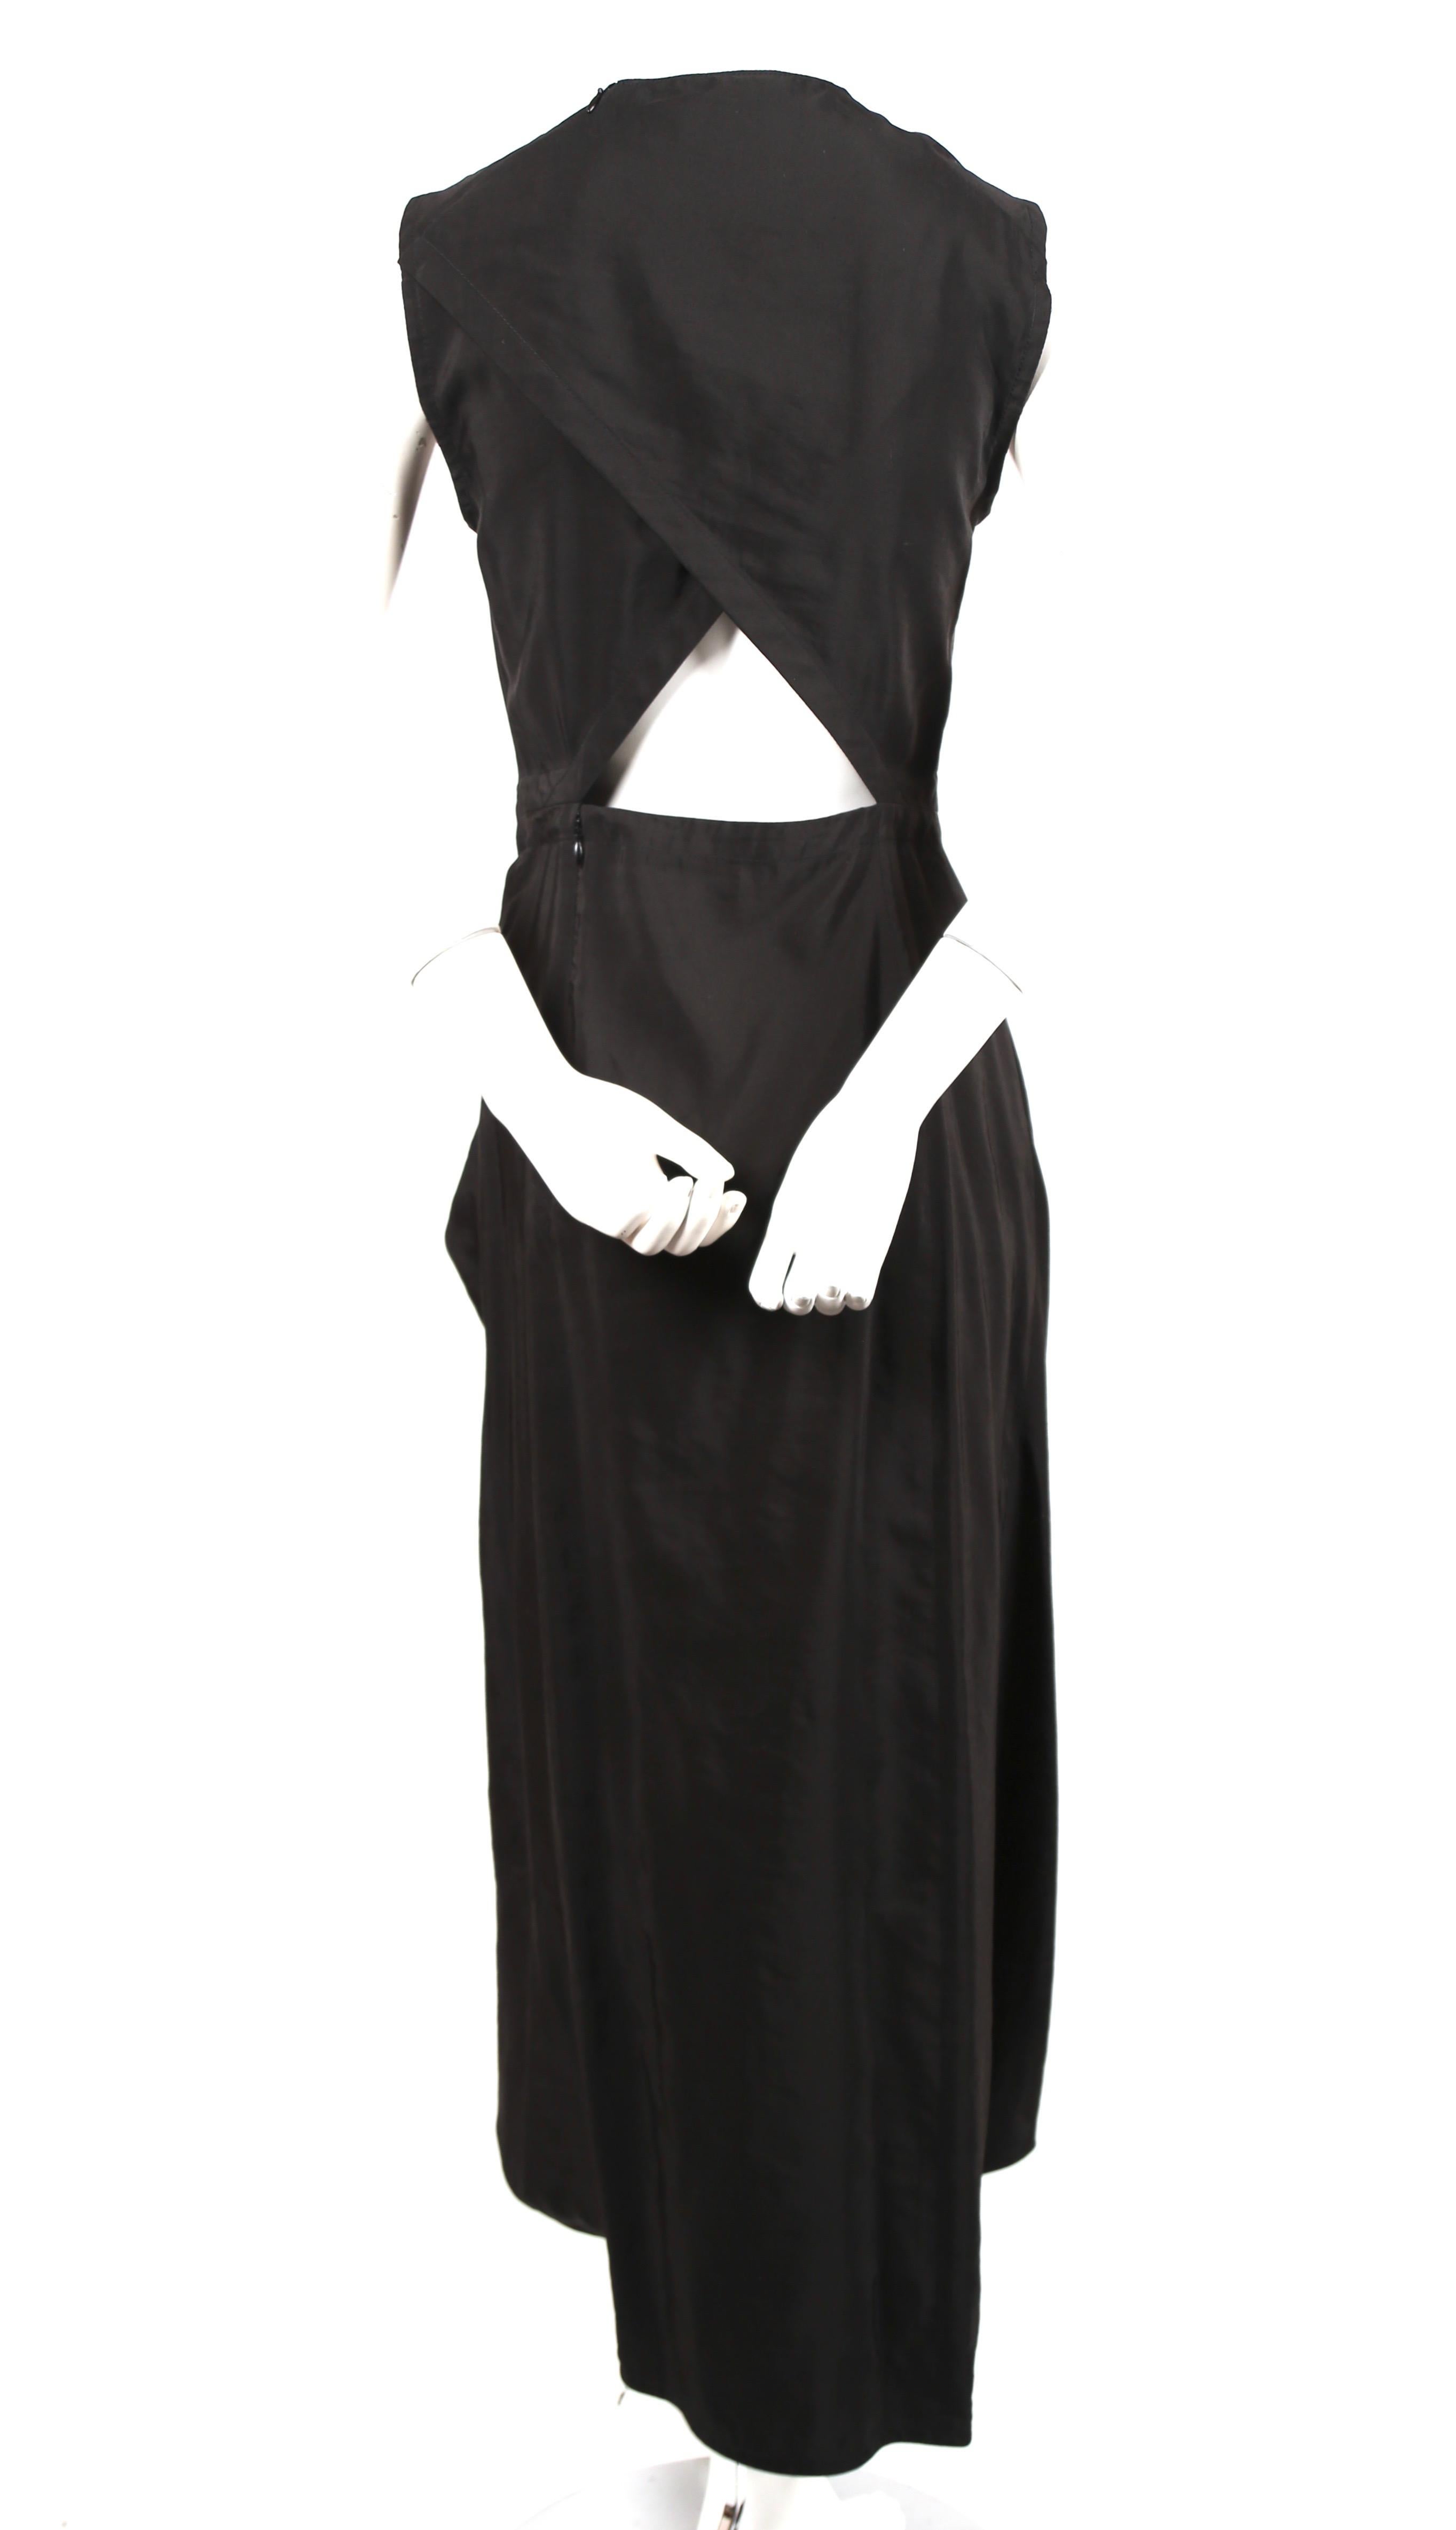 new CELINE By PHOEBE PHILO black dress with ties and cut out back For Sale 2